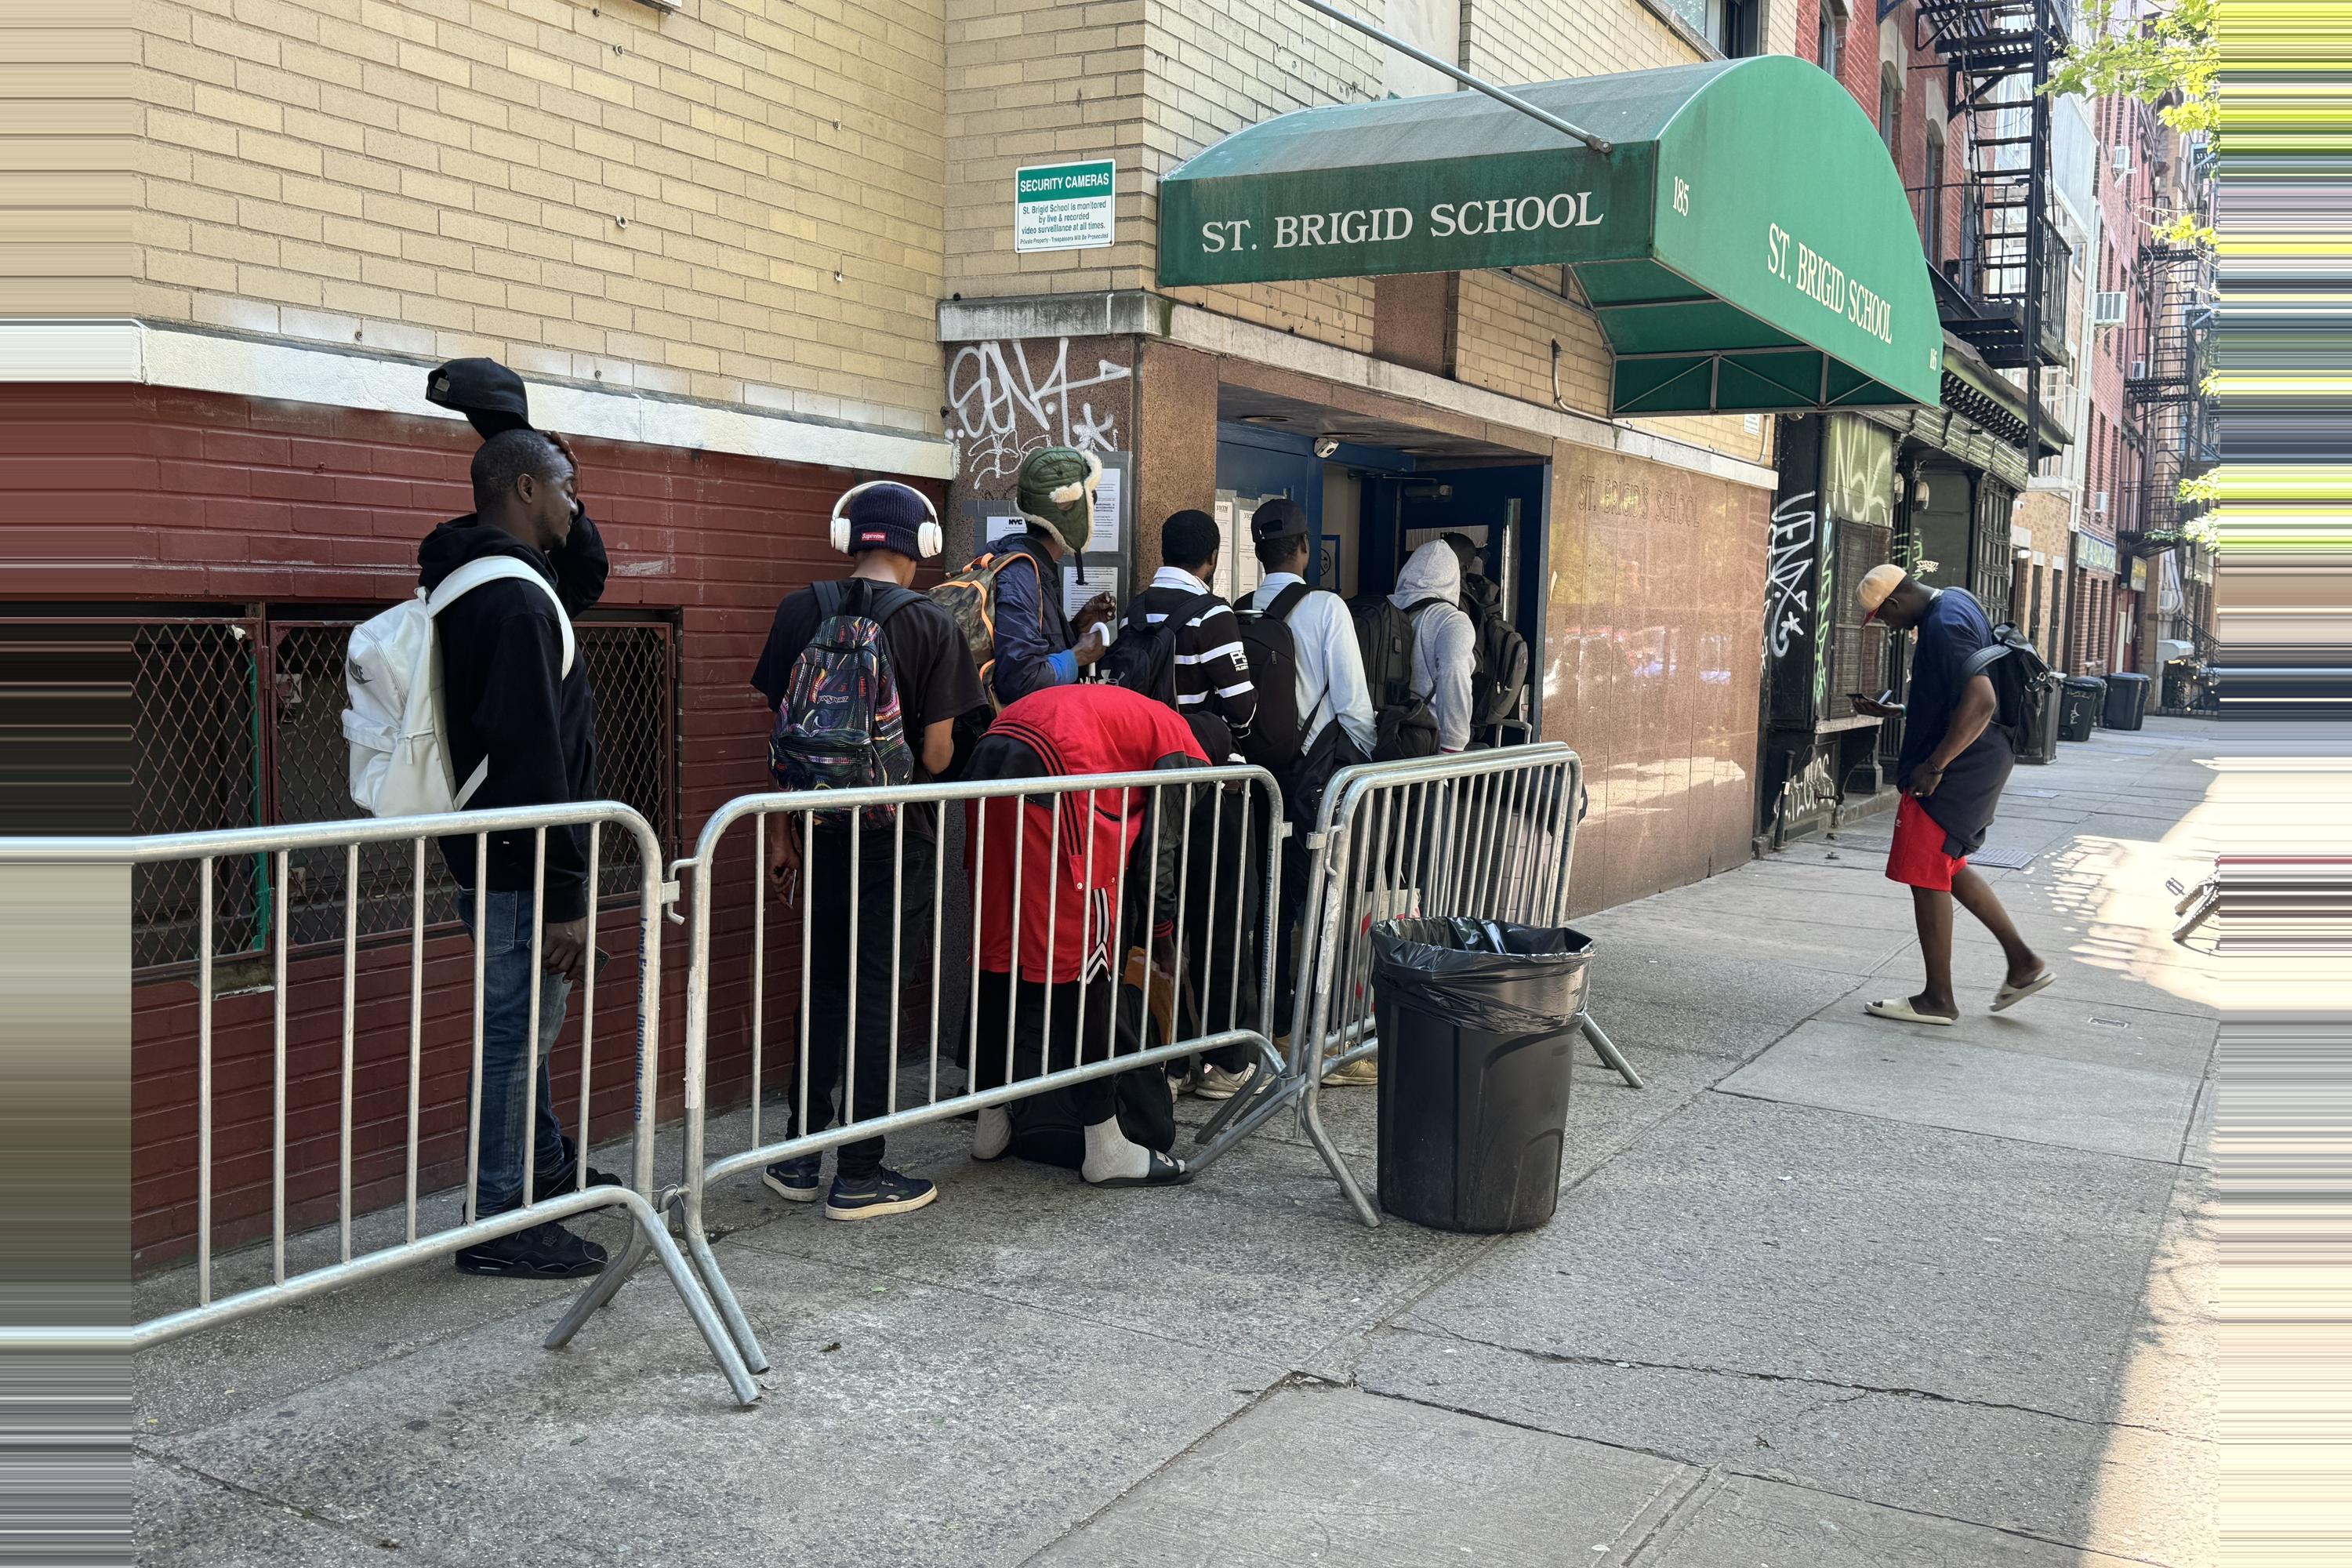 Migrants waited in line outside the city's reticketing center in the East Village on Wednesday morning to reapply for shelter, after their 30- and 60-day stays came to an end. The size of the line fluctuated throughout the morning.